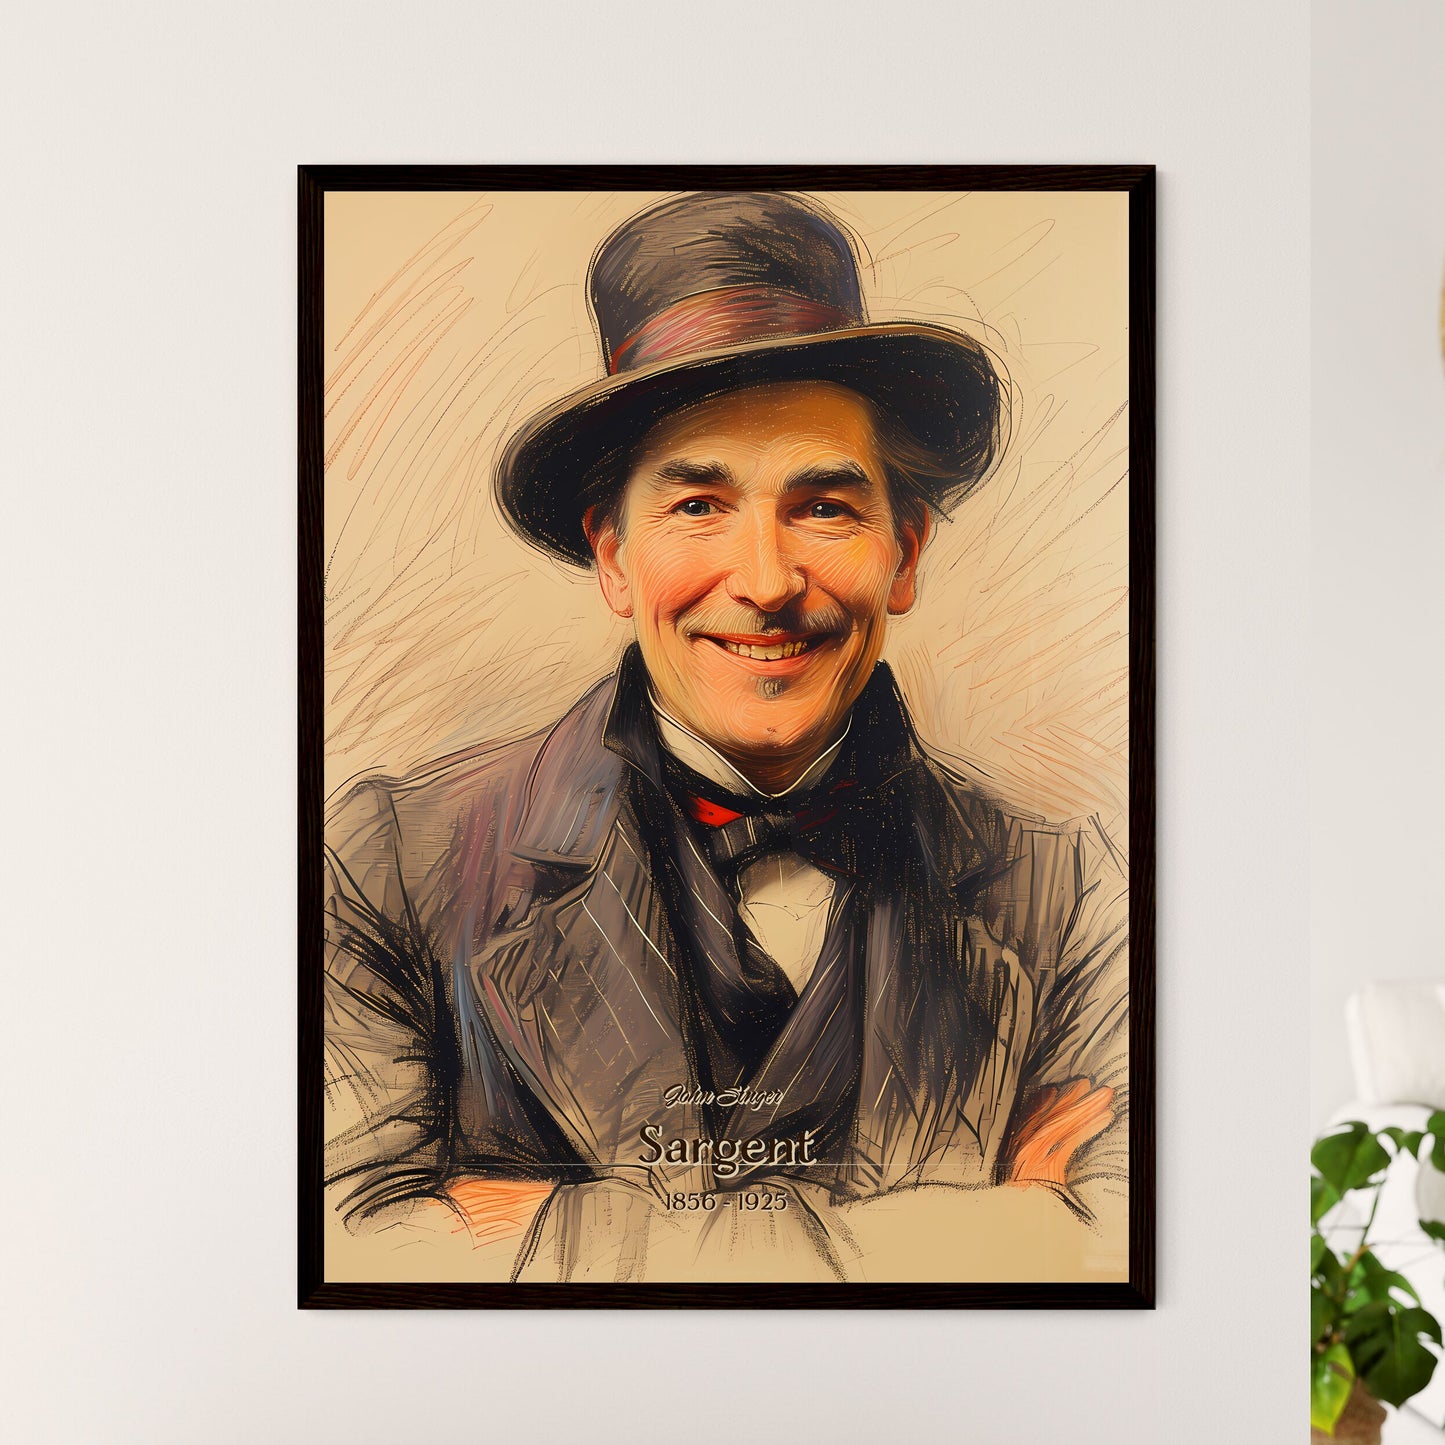 John Singer, Sargent, 1856 - 1925, A Poster of a man wearing a hat and suit Default Title